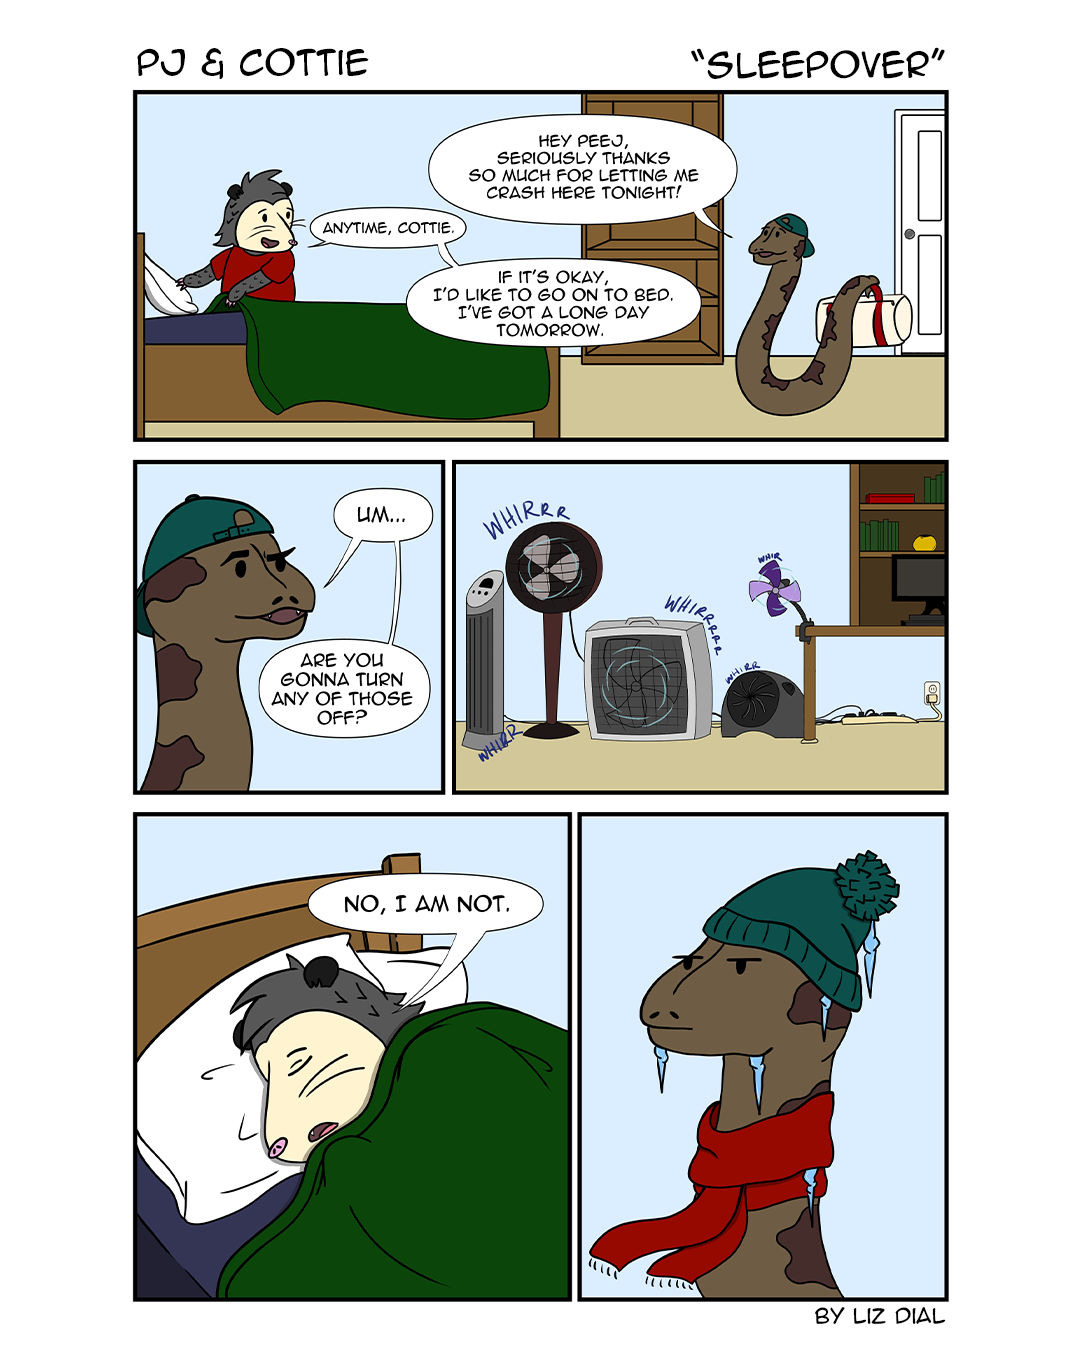 Check out our new comic, 'PJ & Cottie'